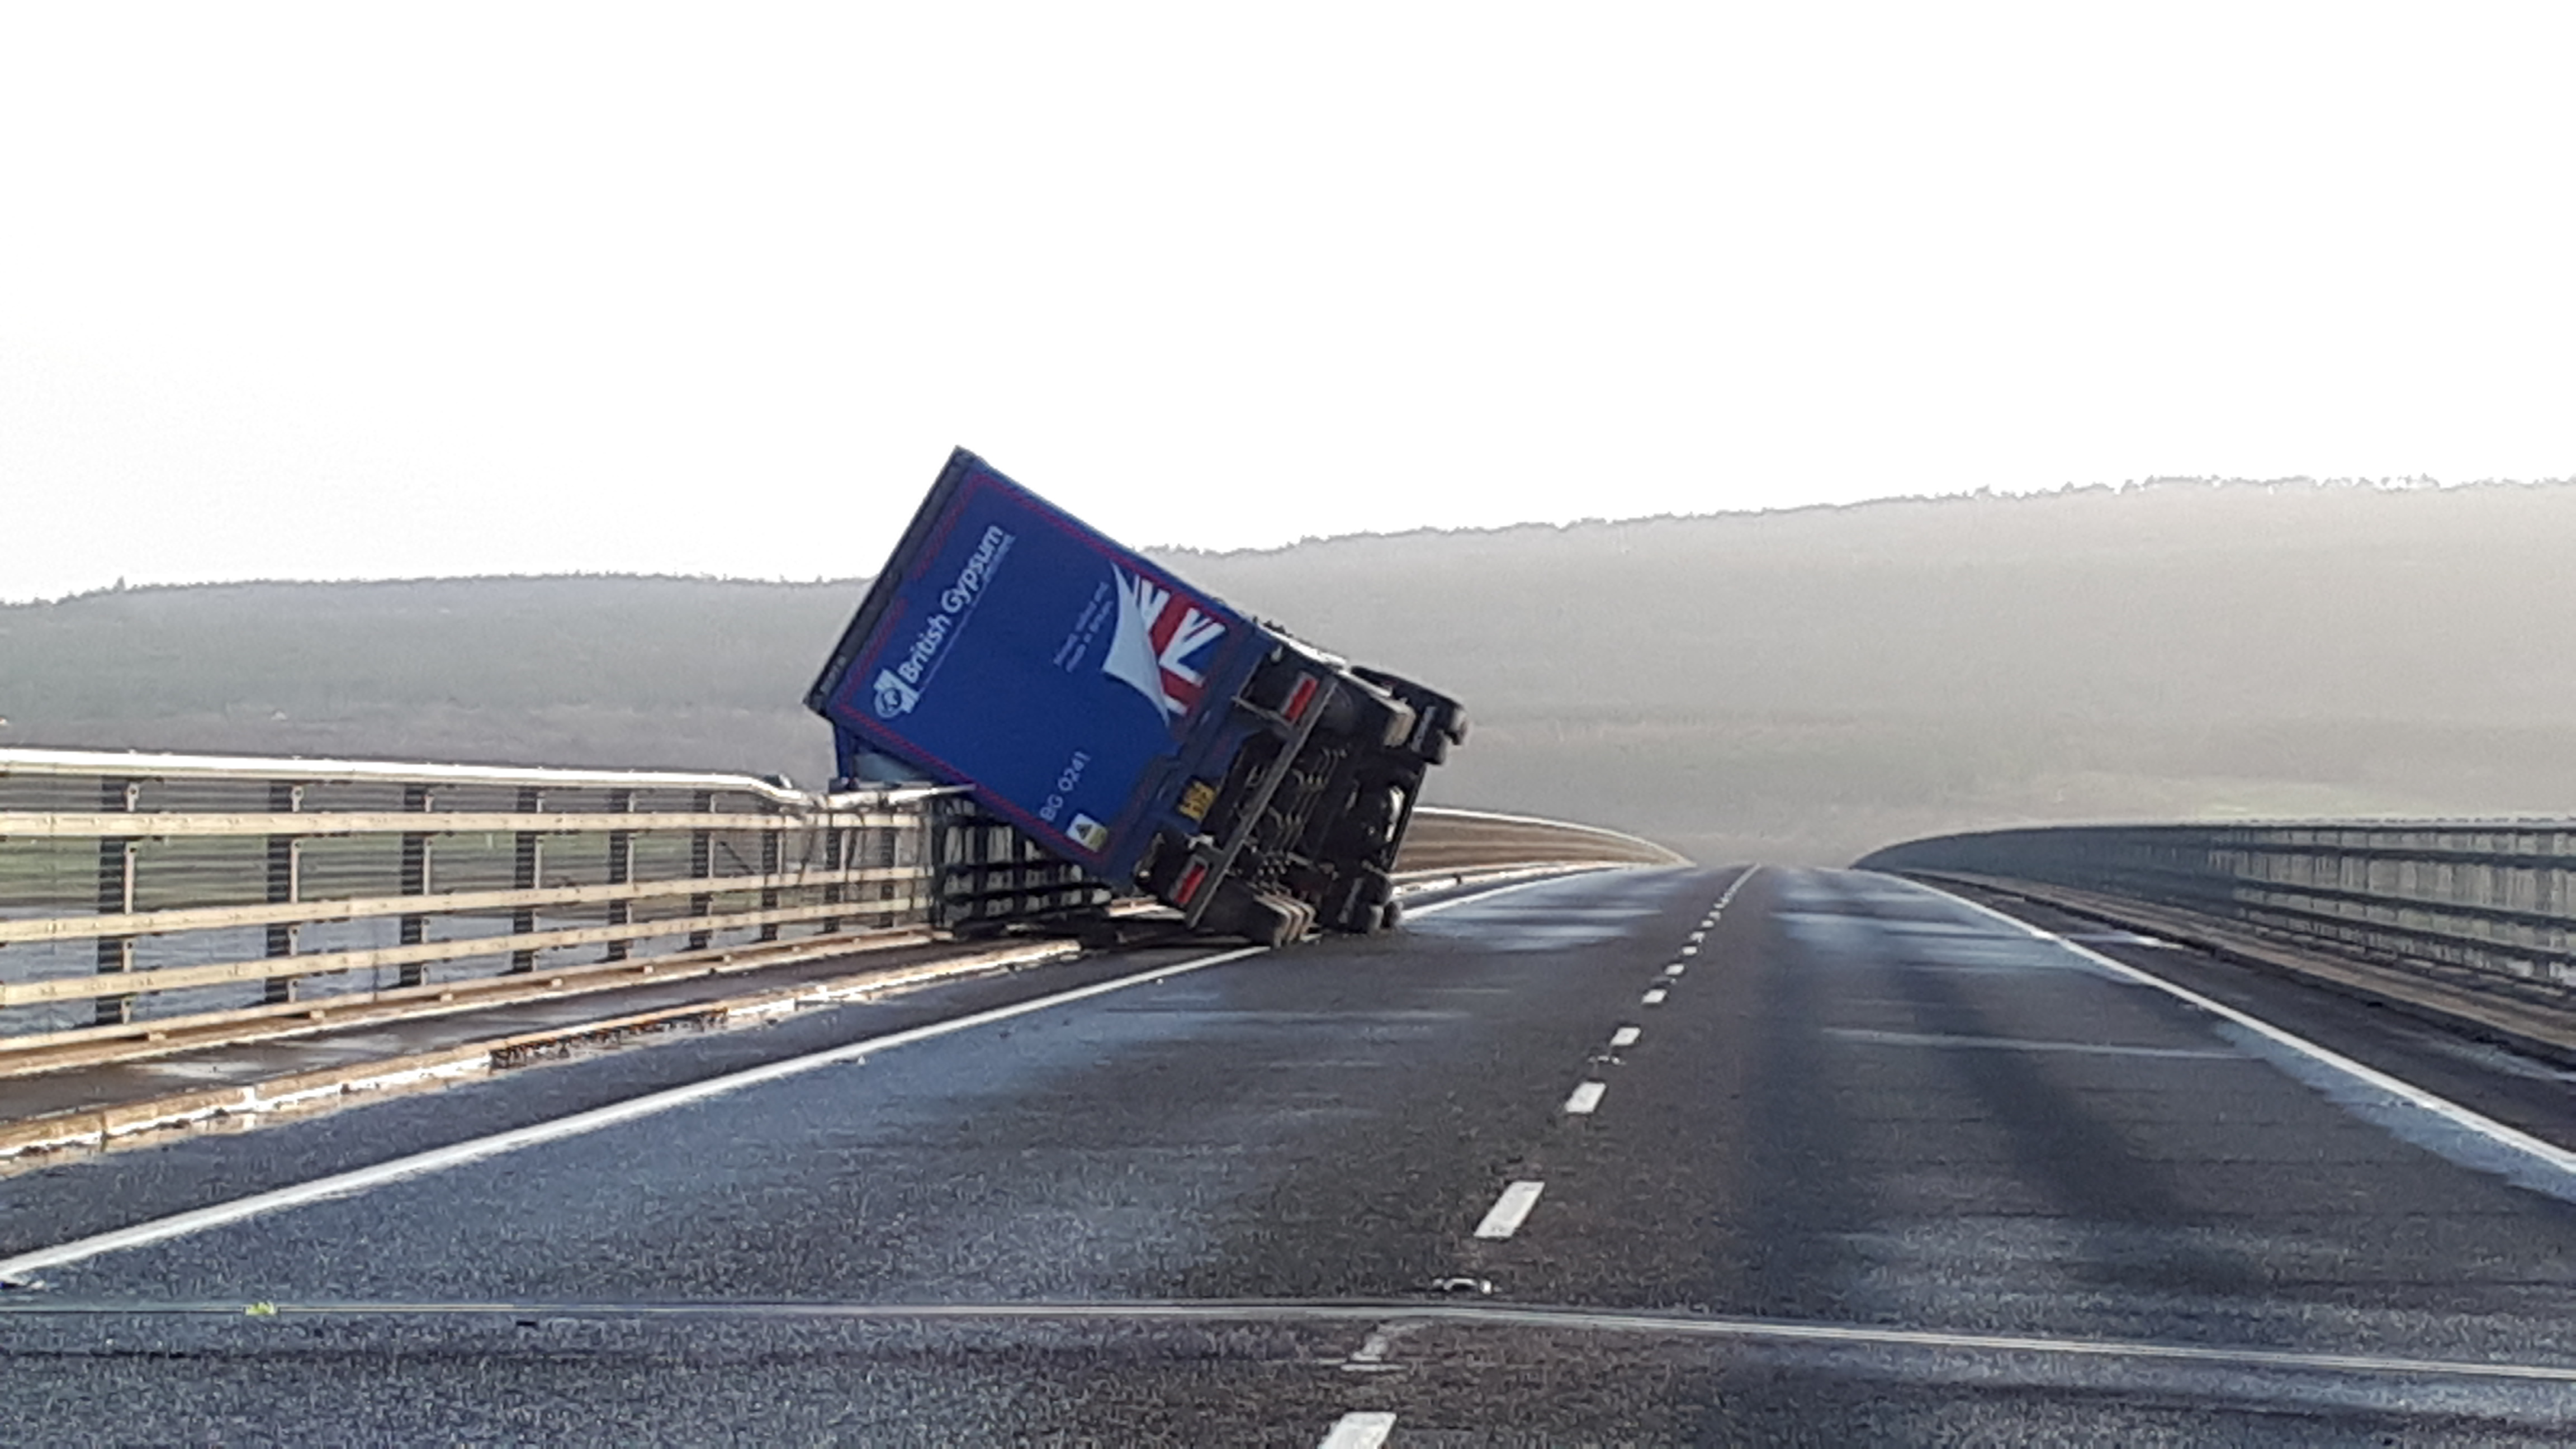 The HGV was travelling southbound on the A9 on the Dornoch Bridge when it toppled over due to high winds.